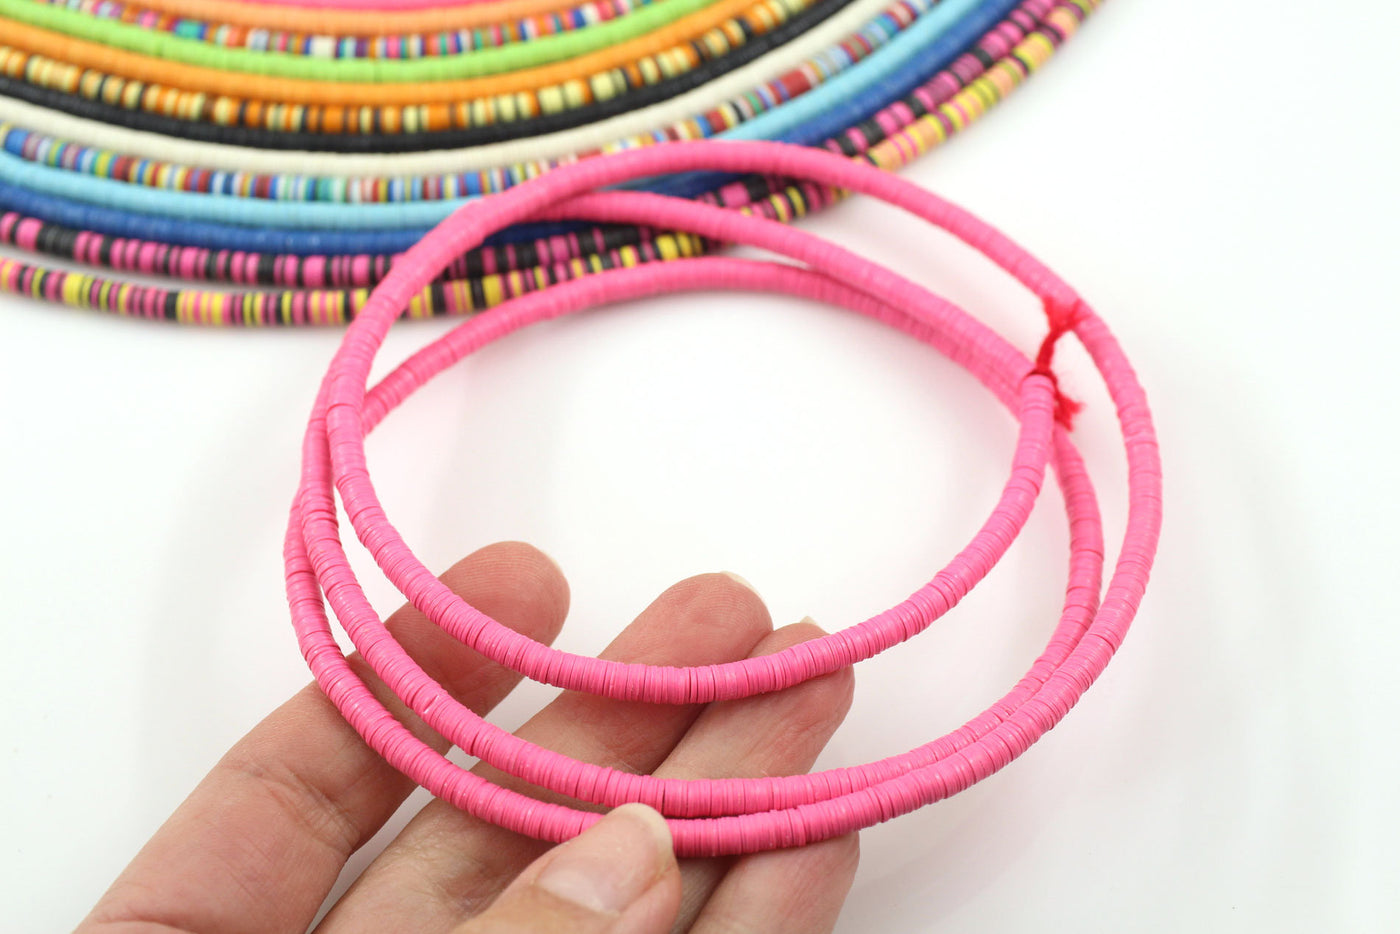 4mm Vinyl Record Beads: Ghanaian Heishi Disc Spacers, Pink Bohemian Necklace from Africa